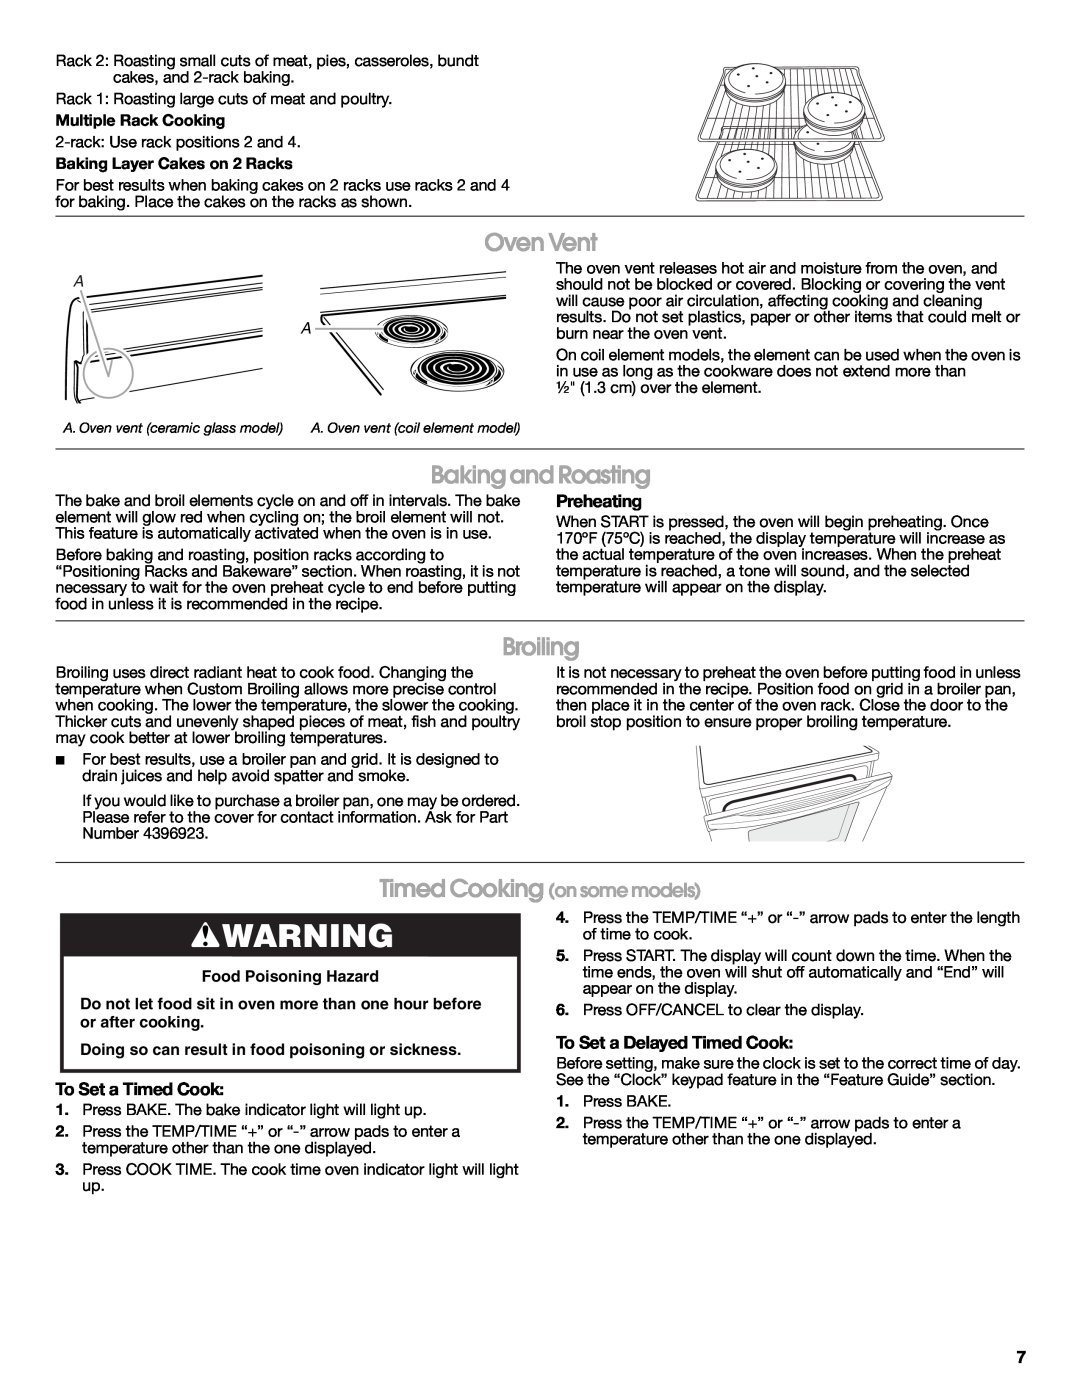 Whirlpool W10204316B Oven Vent, Baking and Roasting, Broiling, Preheating, To Set a Timed Cook, Food Poisoning Hazard 